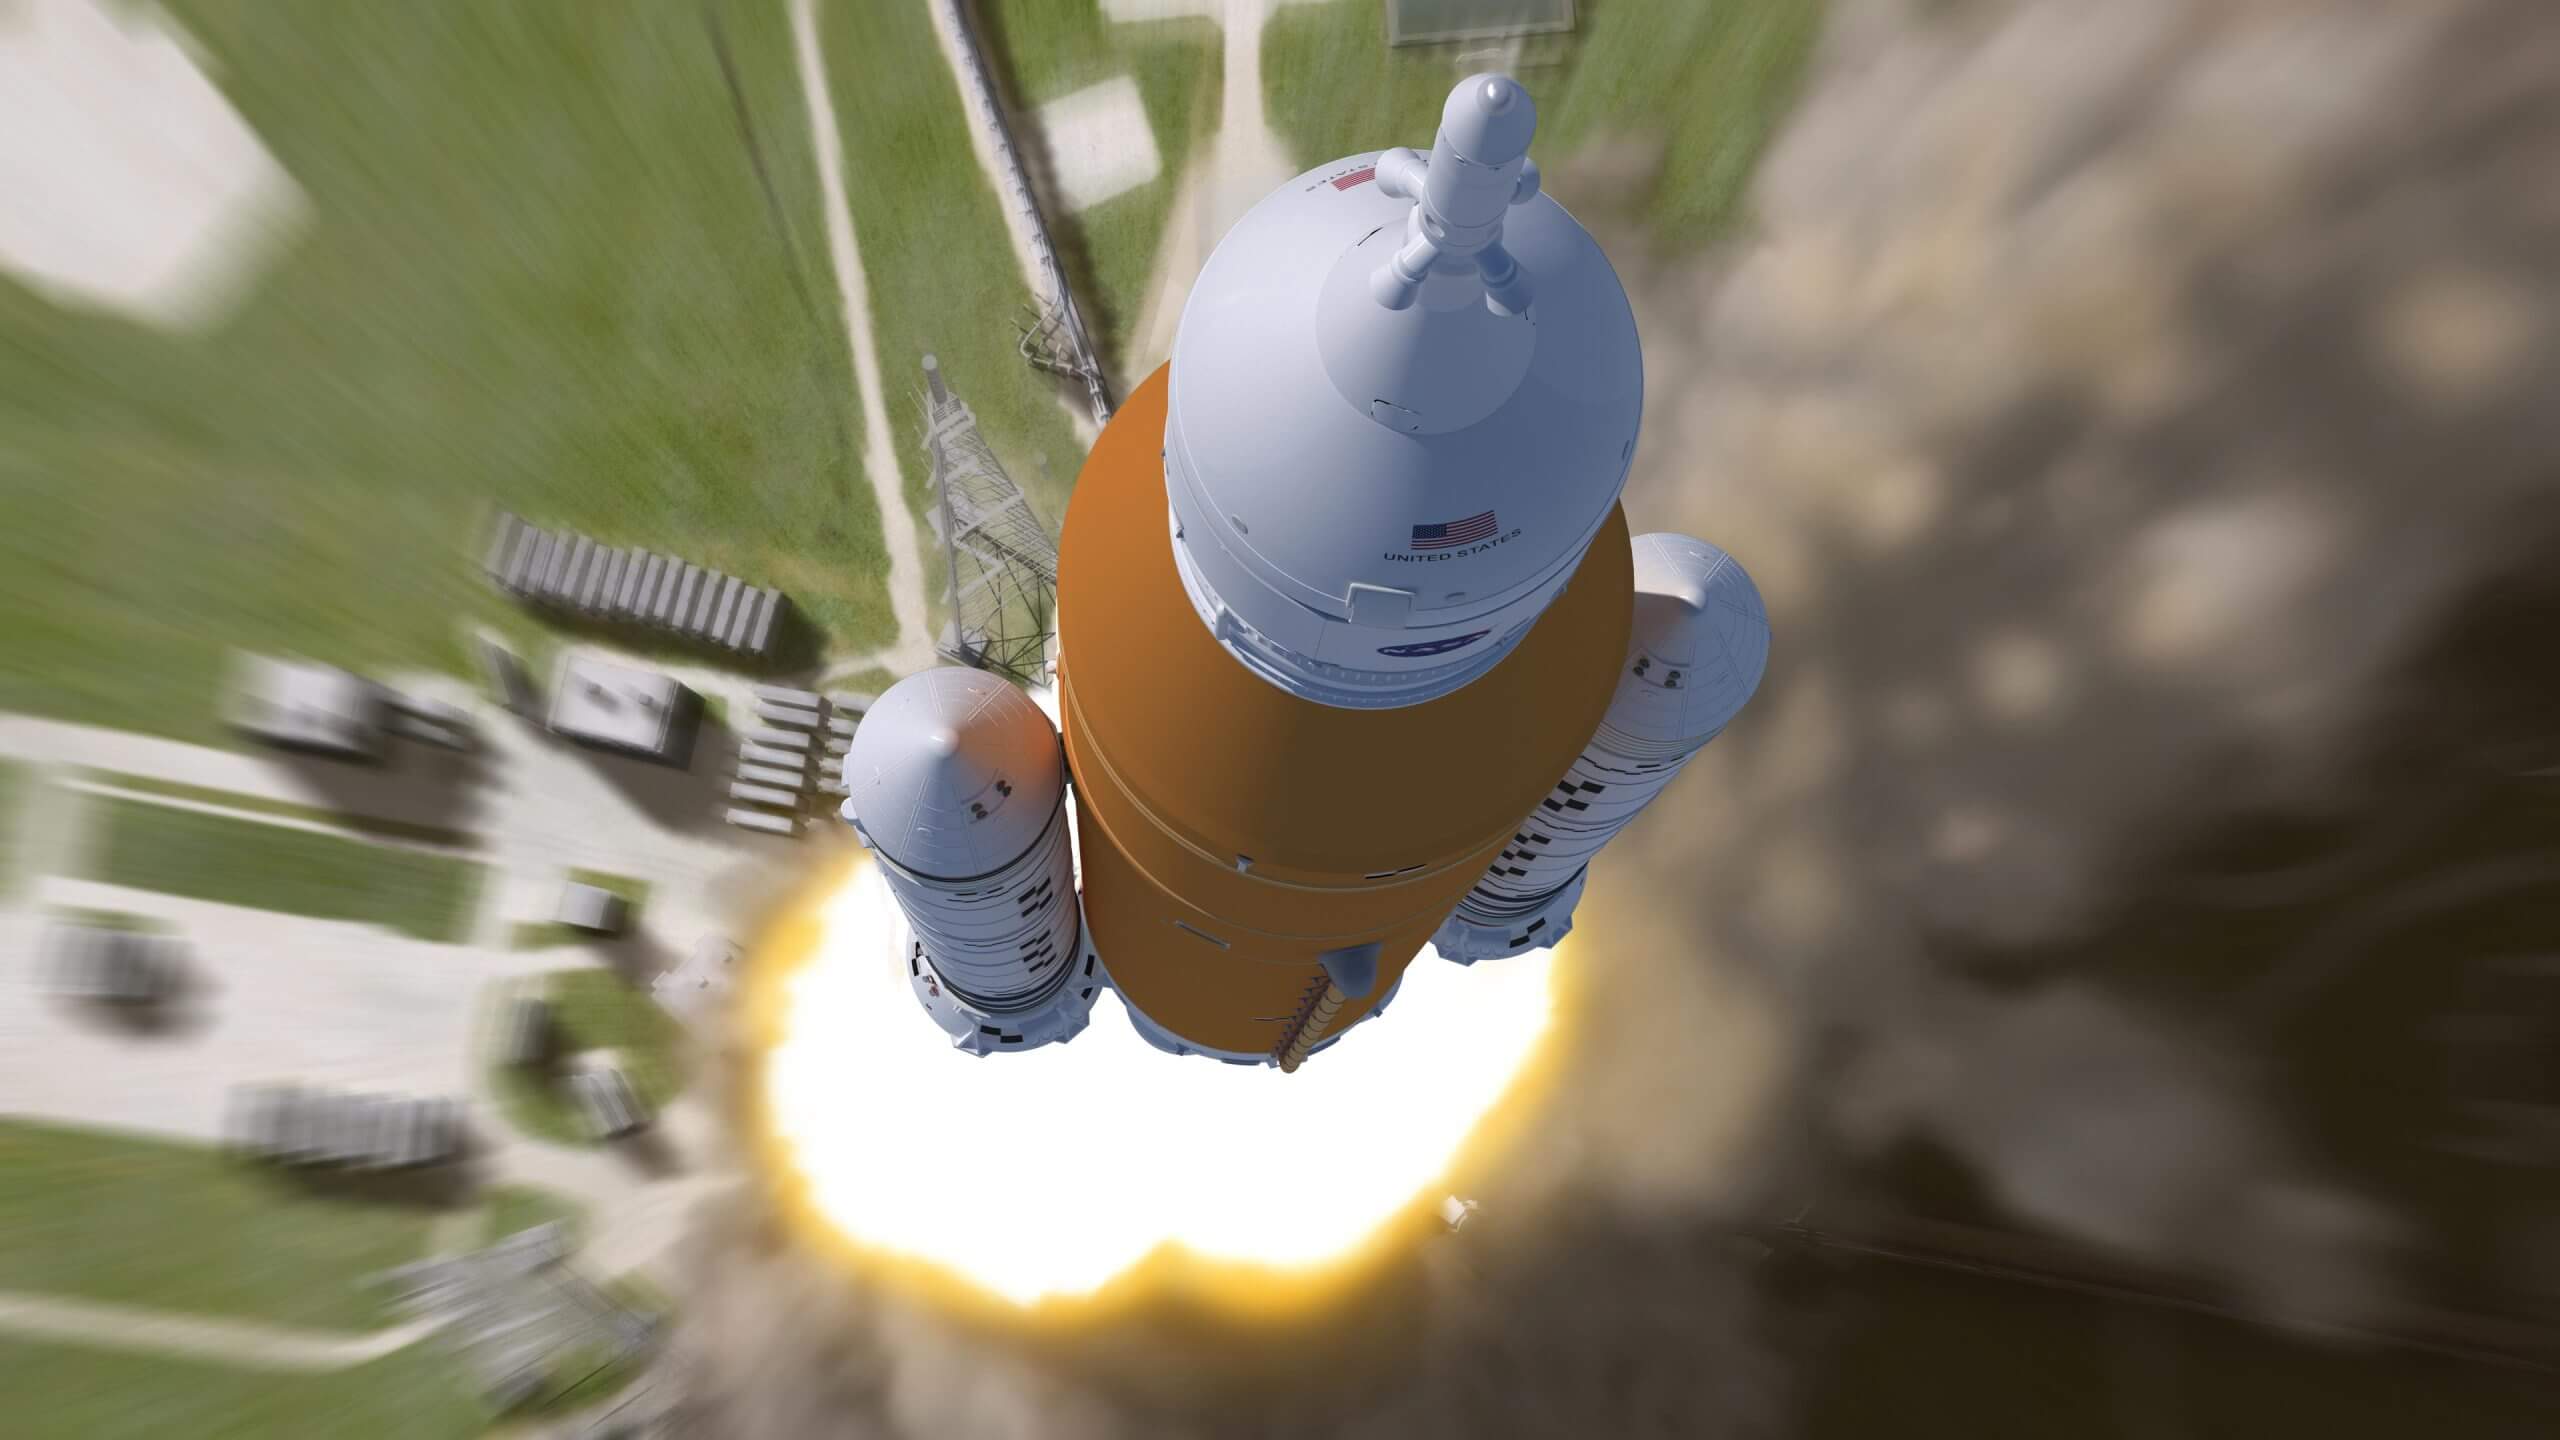 This artist impression shows an aerial view of the liftoff of a NASA Space Launch System rocket. This Block 1 crew configuration of the rocket will send the first three Artemis missions to the moon. Credit: NASA/MSFC